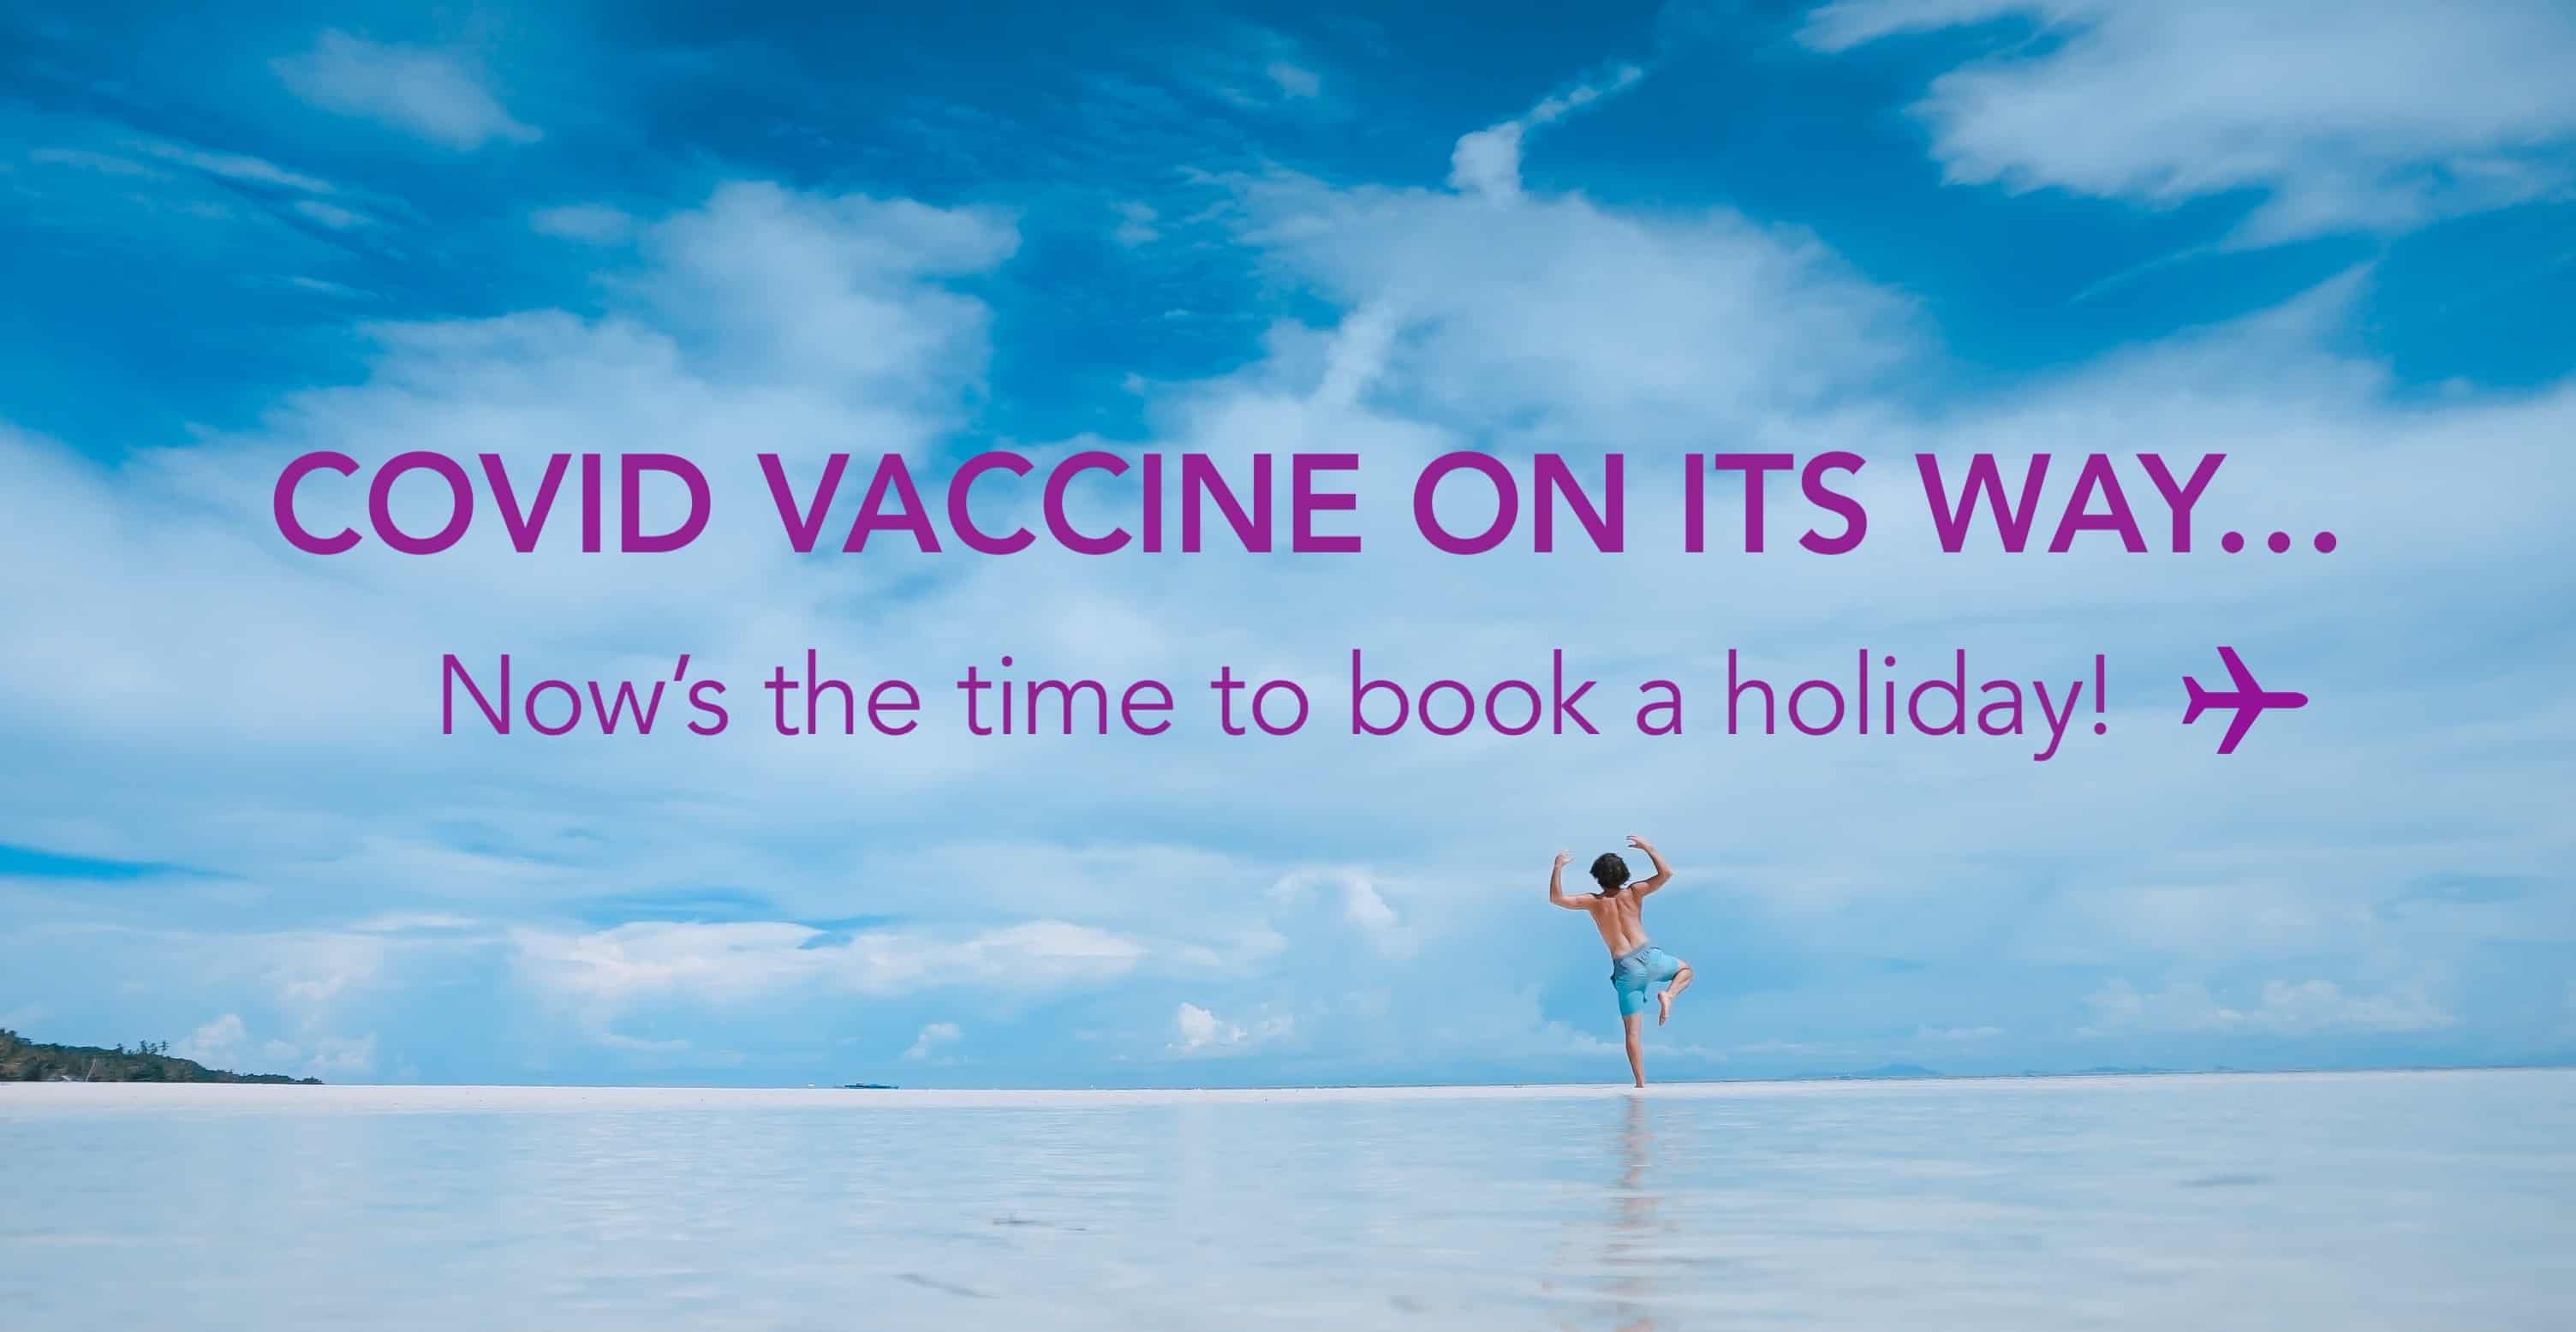 Covid vaccine on it's way...Now's the time to book a holiday!